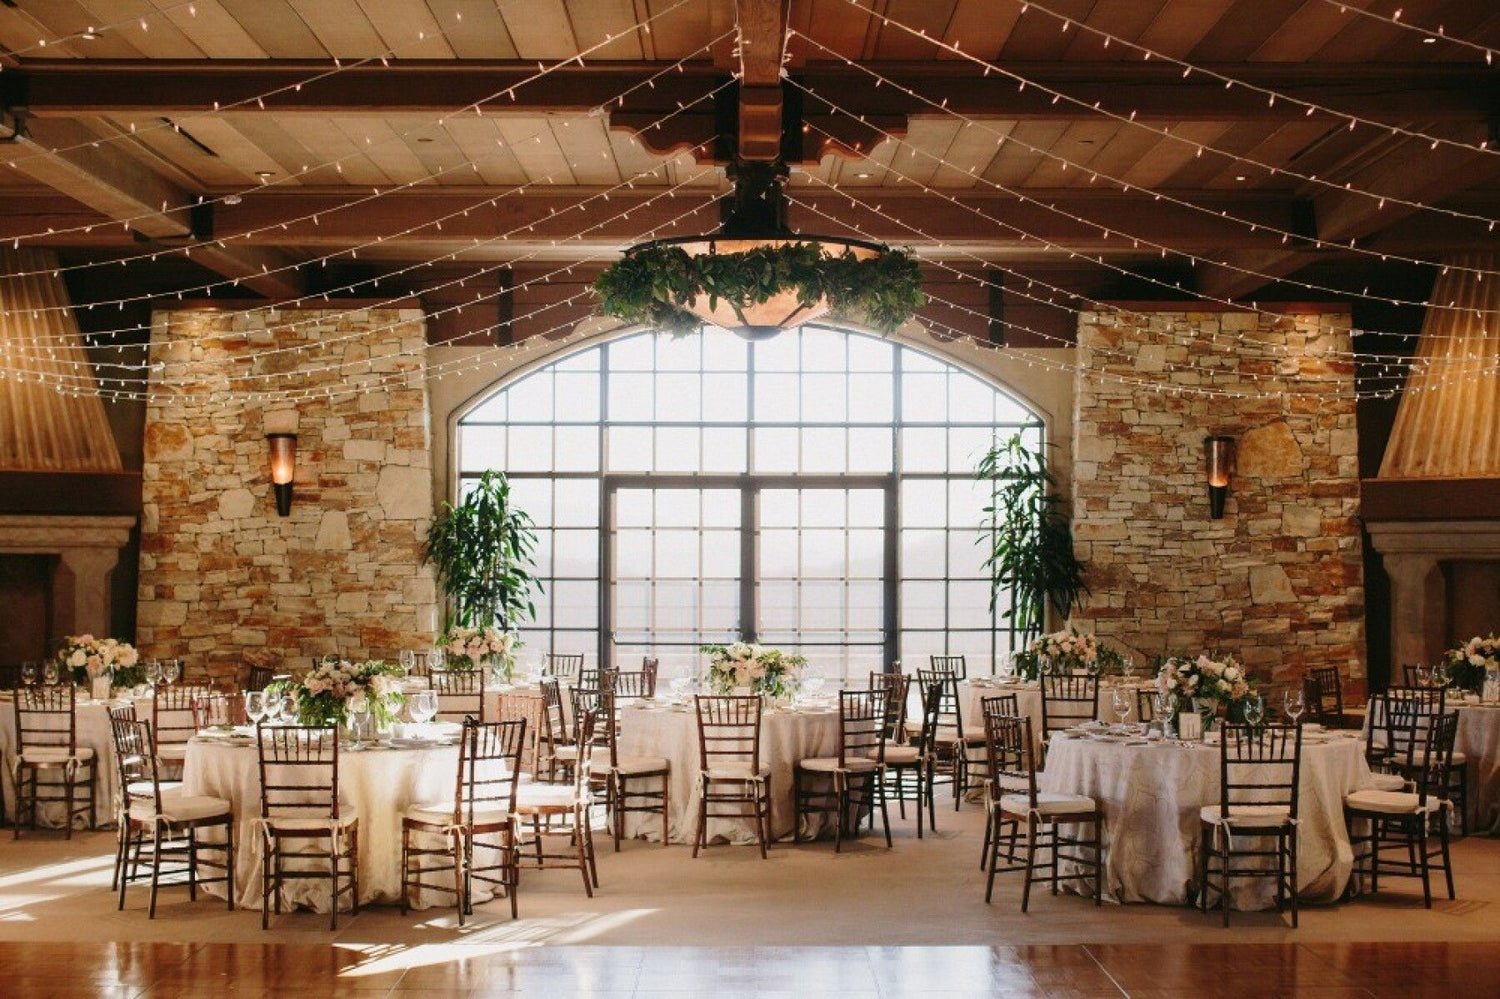 Wedding reception in the vast club house ballroom at Tehama with a floral chandelier and walk in fireplaces